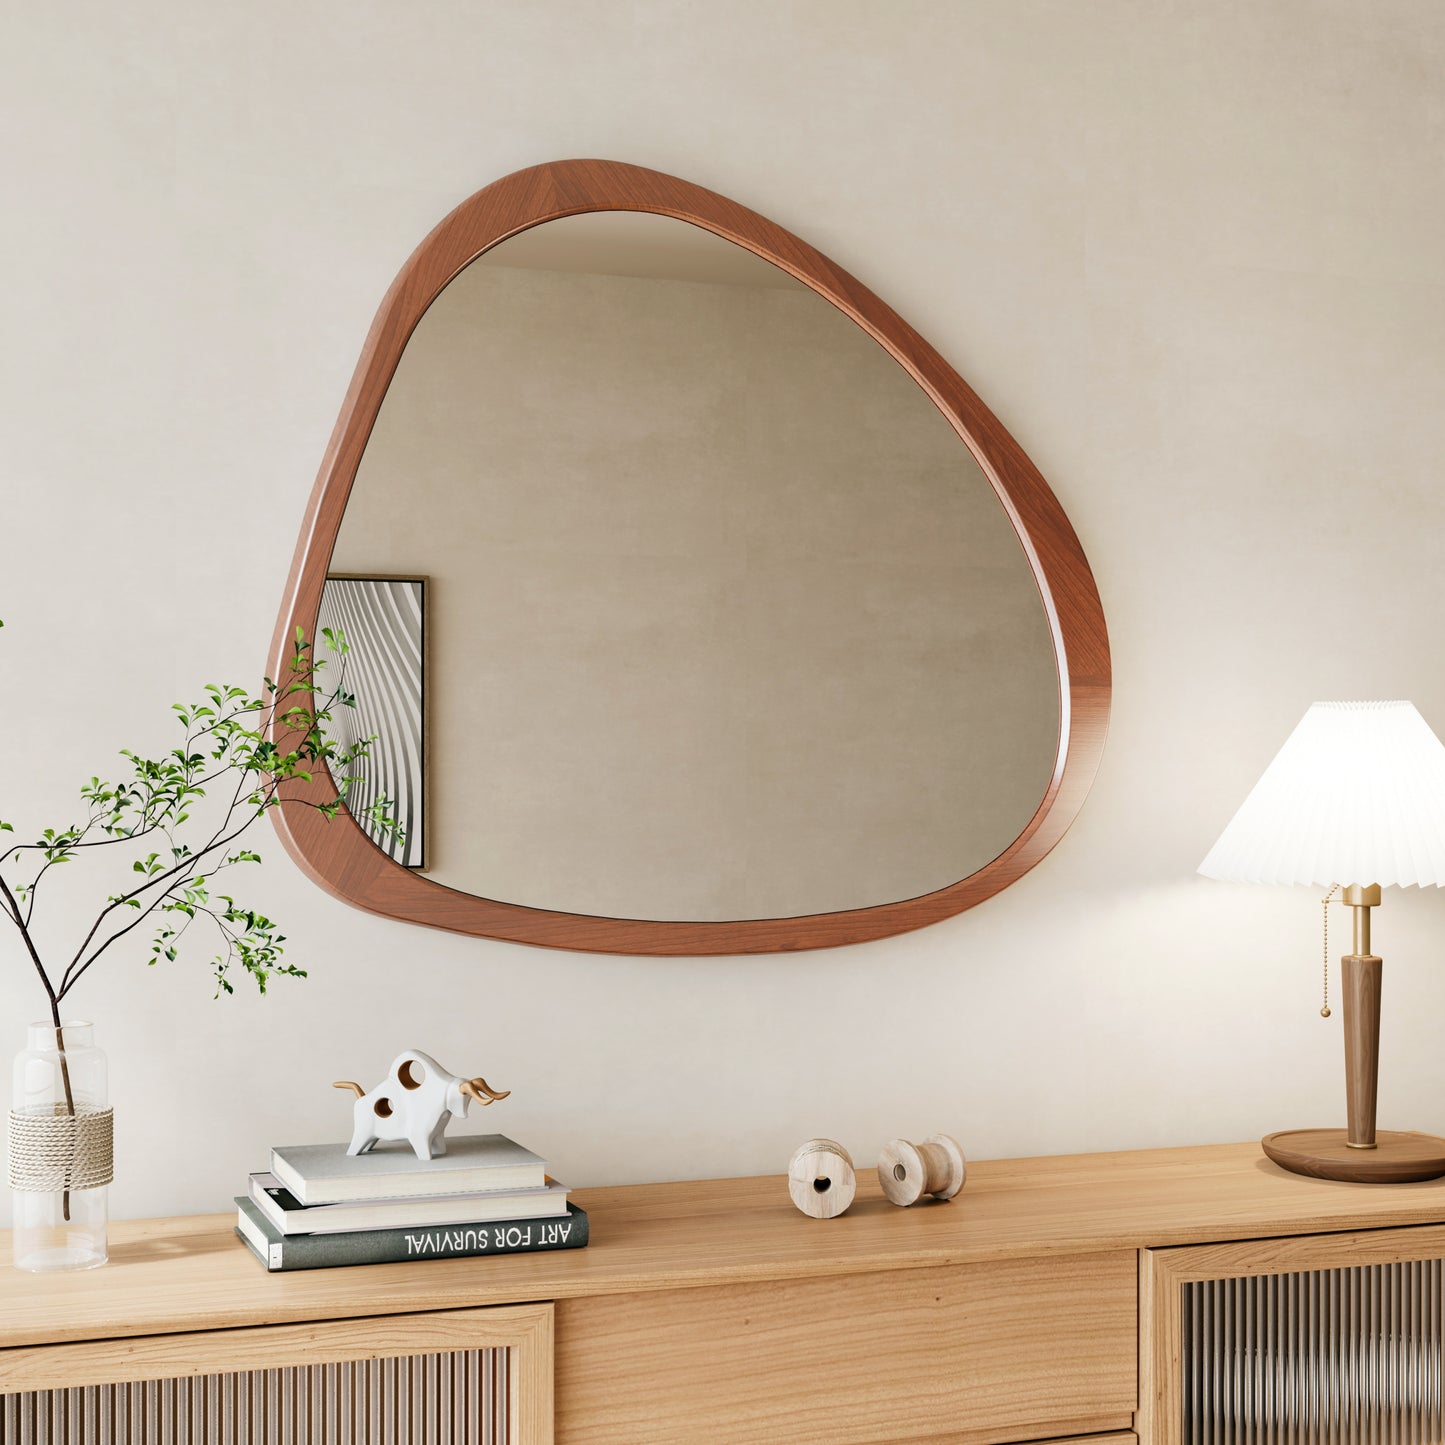 Solid Wood Mirror 45 Inch Asymmetrical Wall Mirror Wooden Framed Mirror Large Sized Dressing Mirror, for Living Room, Bedroom, Bathroom, Hallway or Entry Way